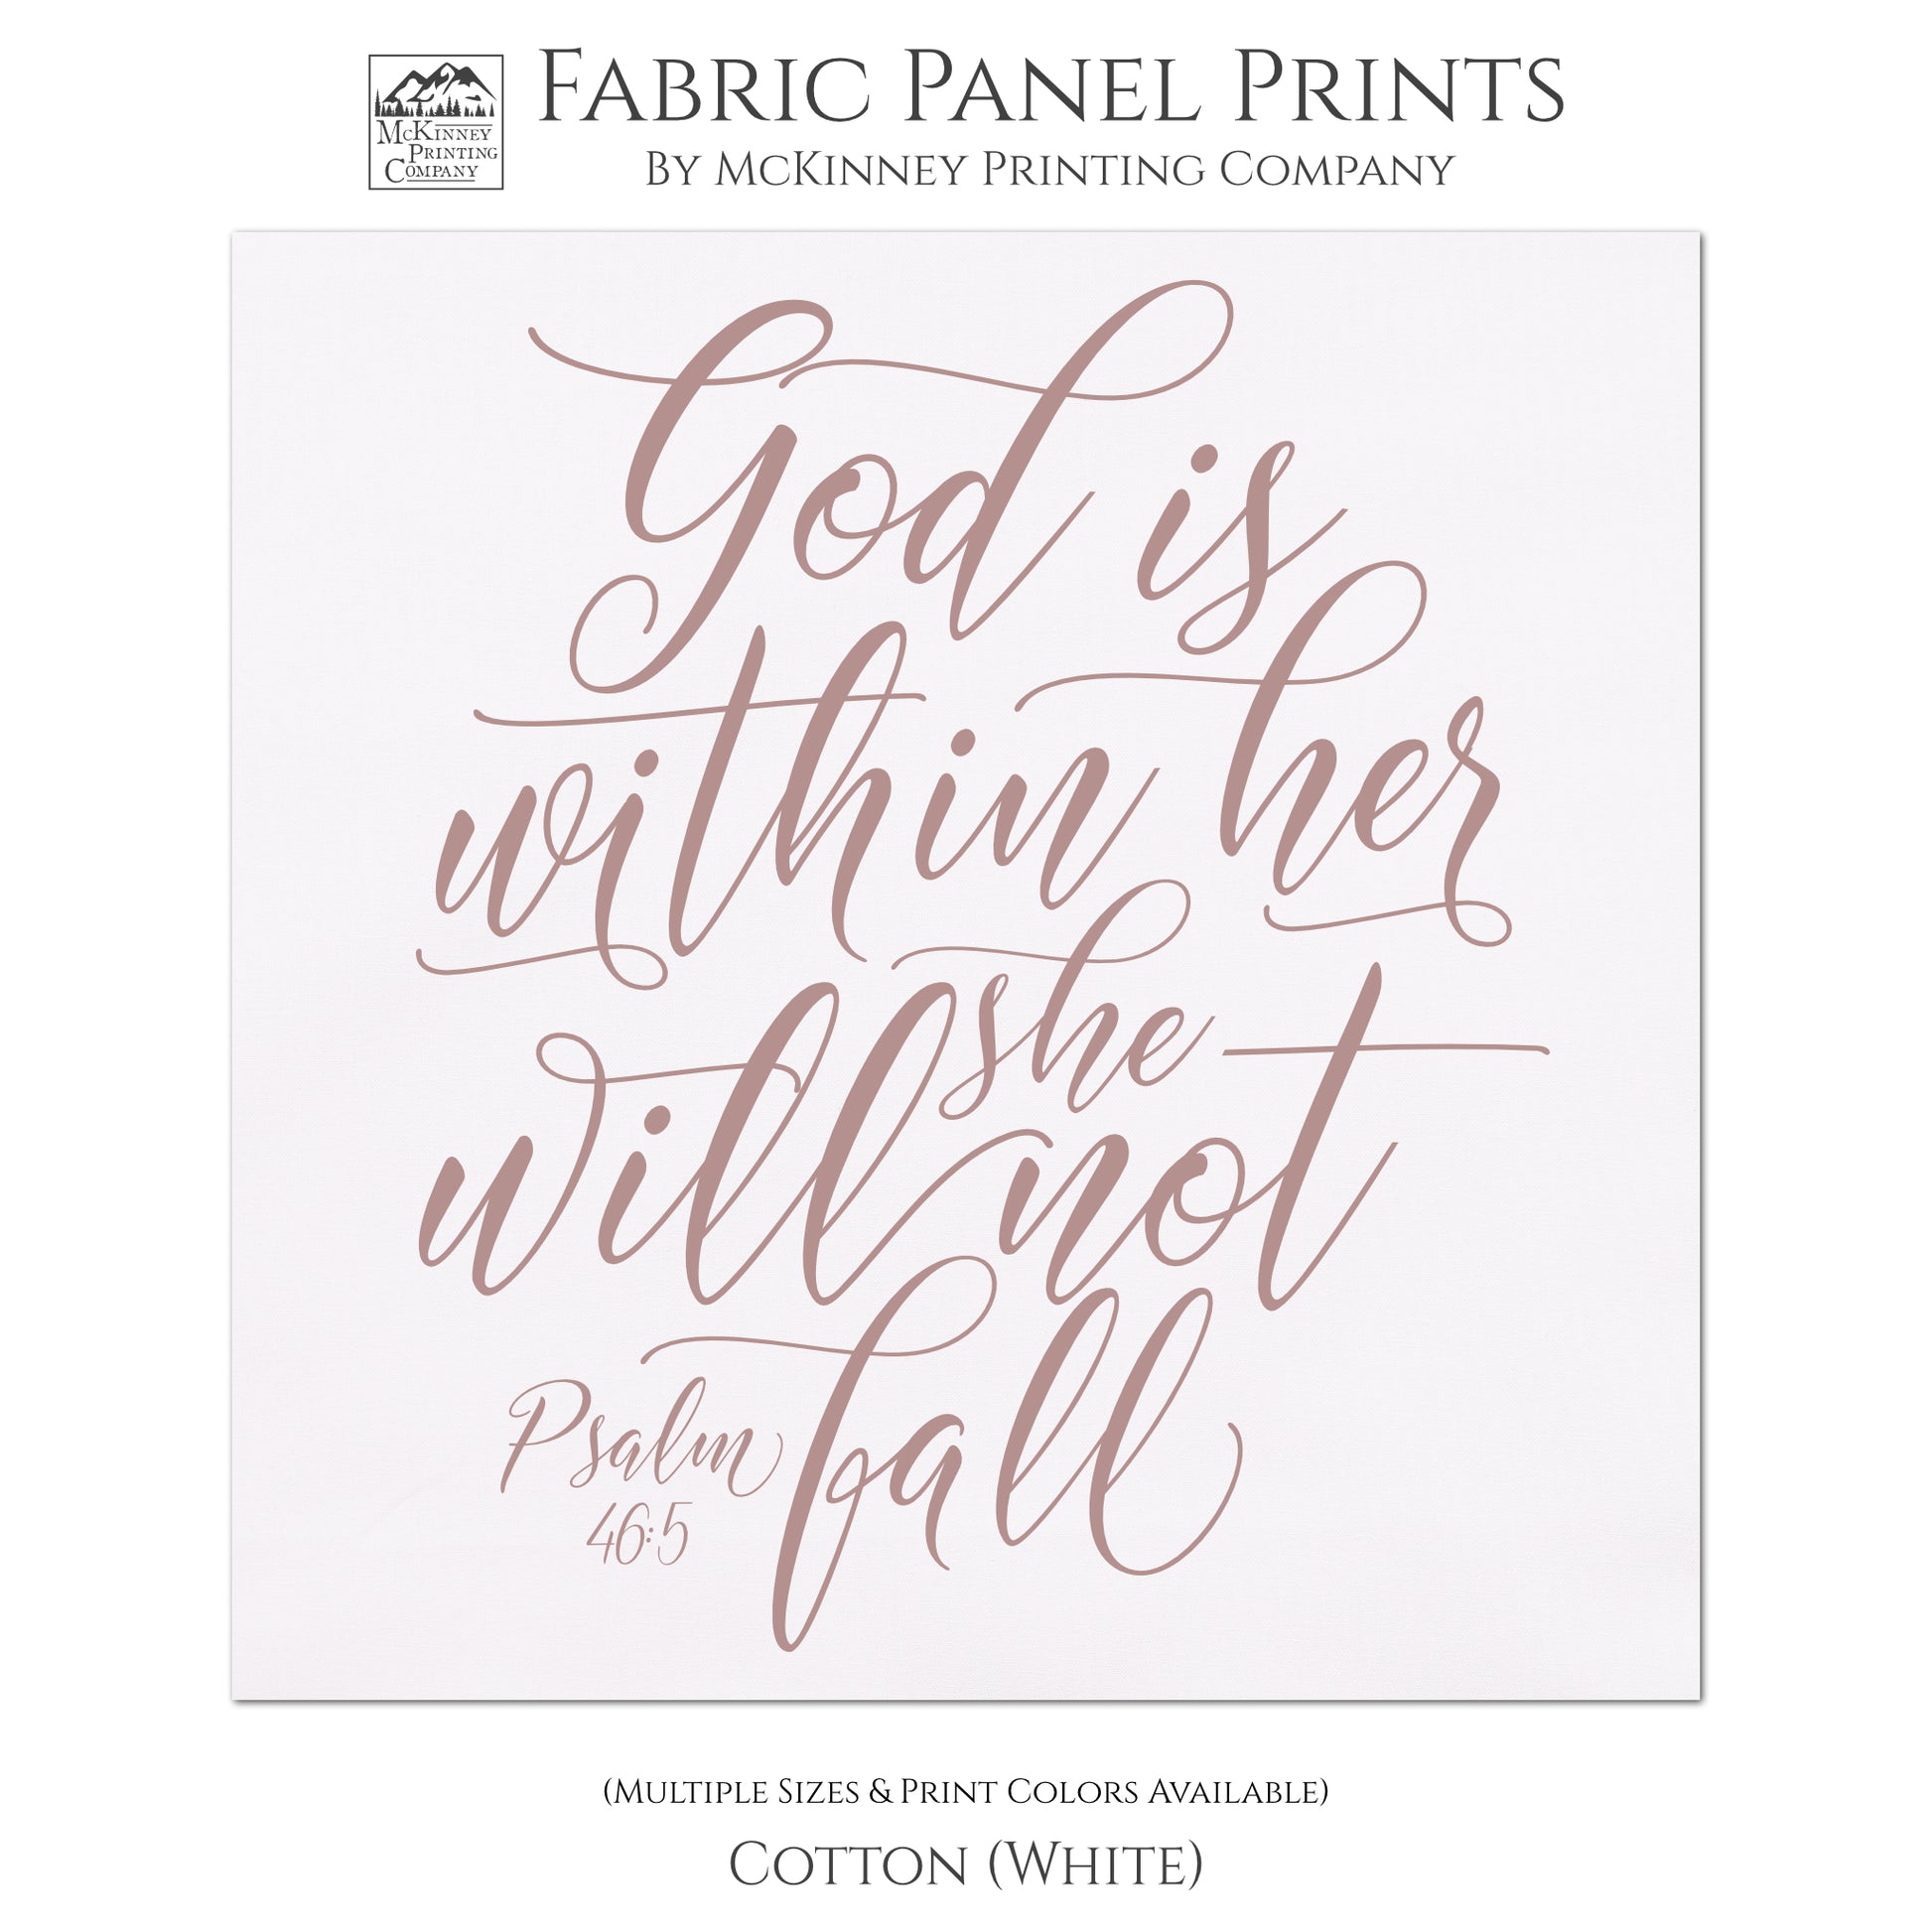 God is within her she will not fall - Psalm 46 5 - Fabric Panel Print, Scripture Fabric, Bible Verse Wall Art - Cotton, White